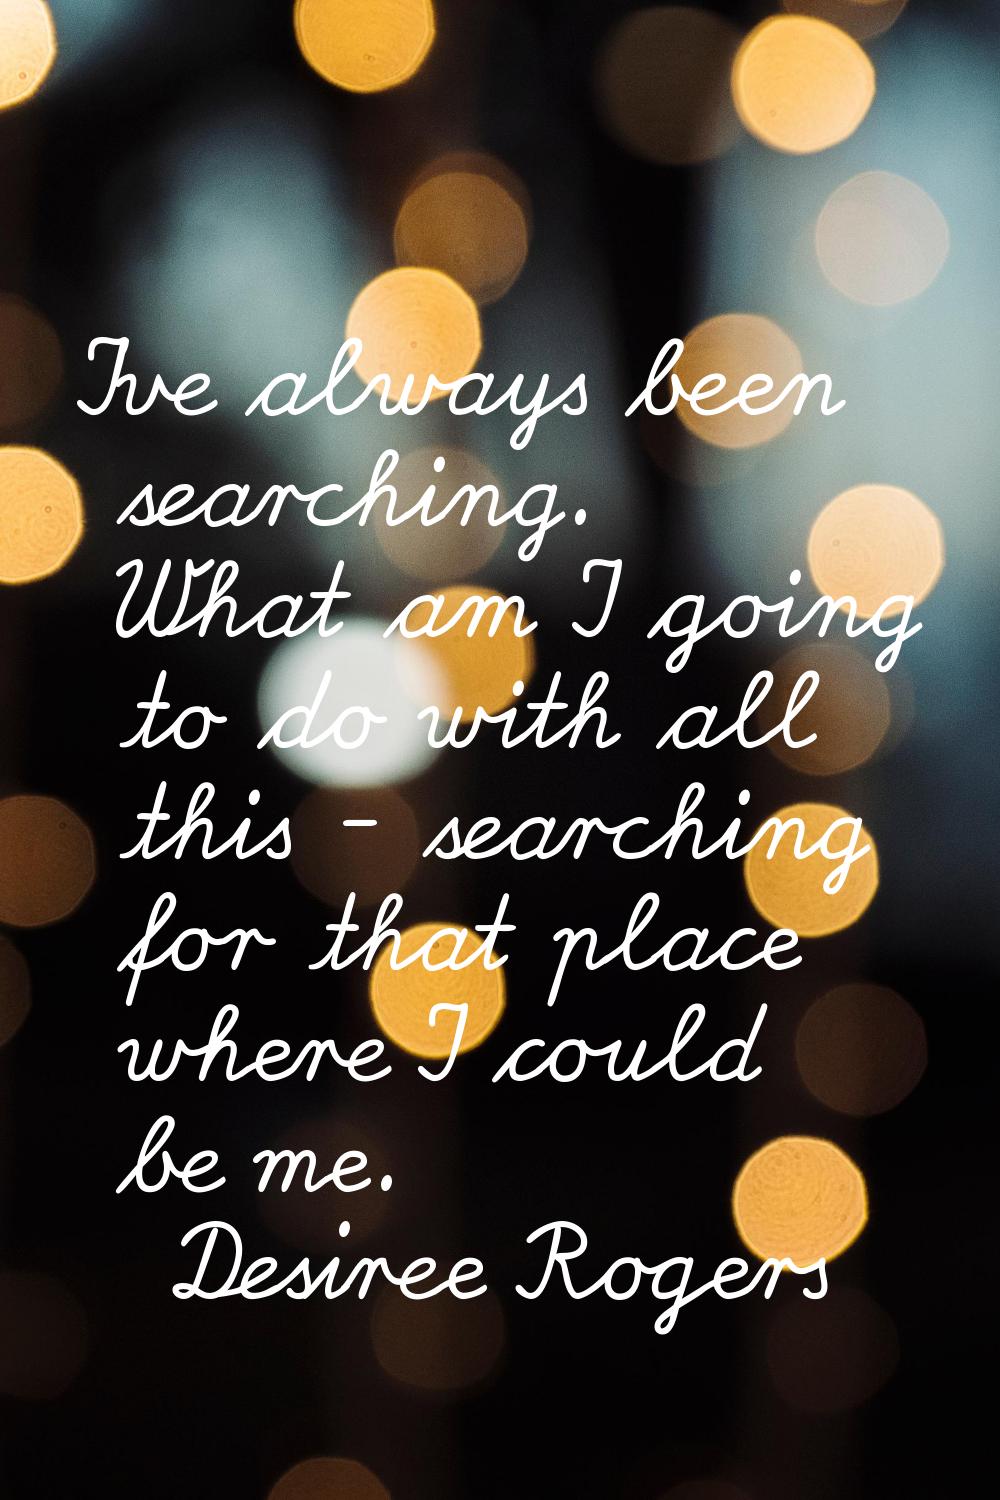 I've always been searching. What am I going to do with all this - searching for that place where I 